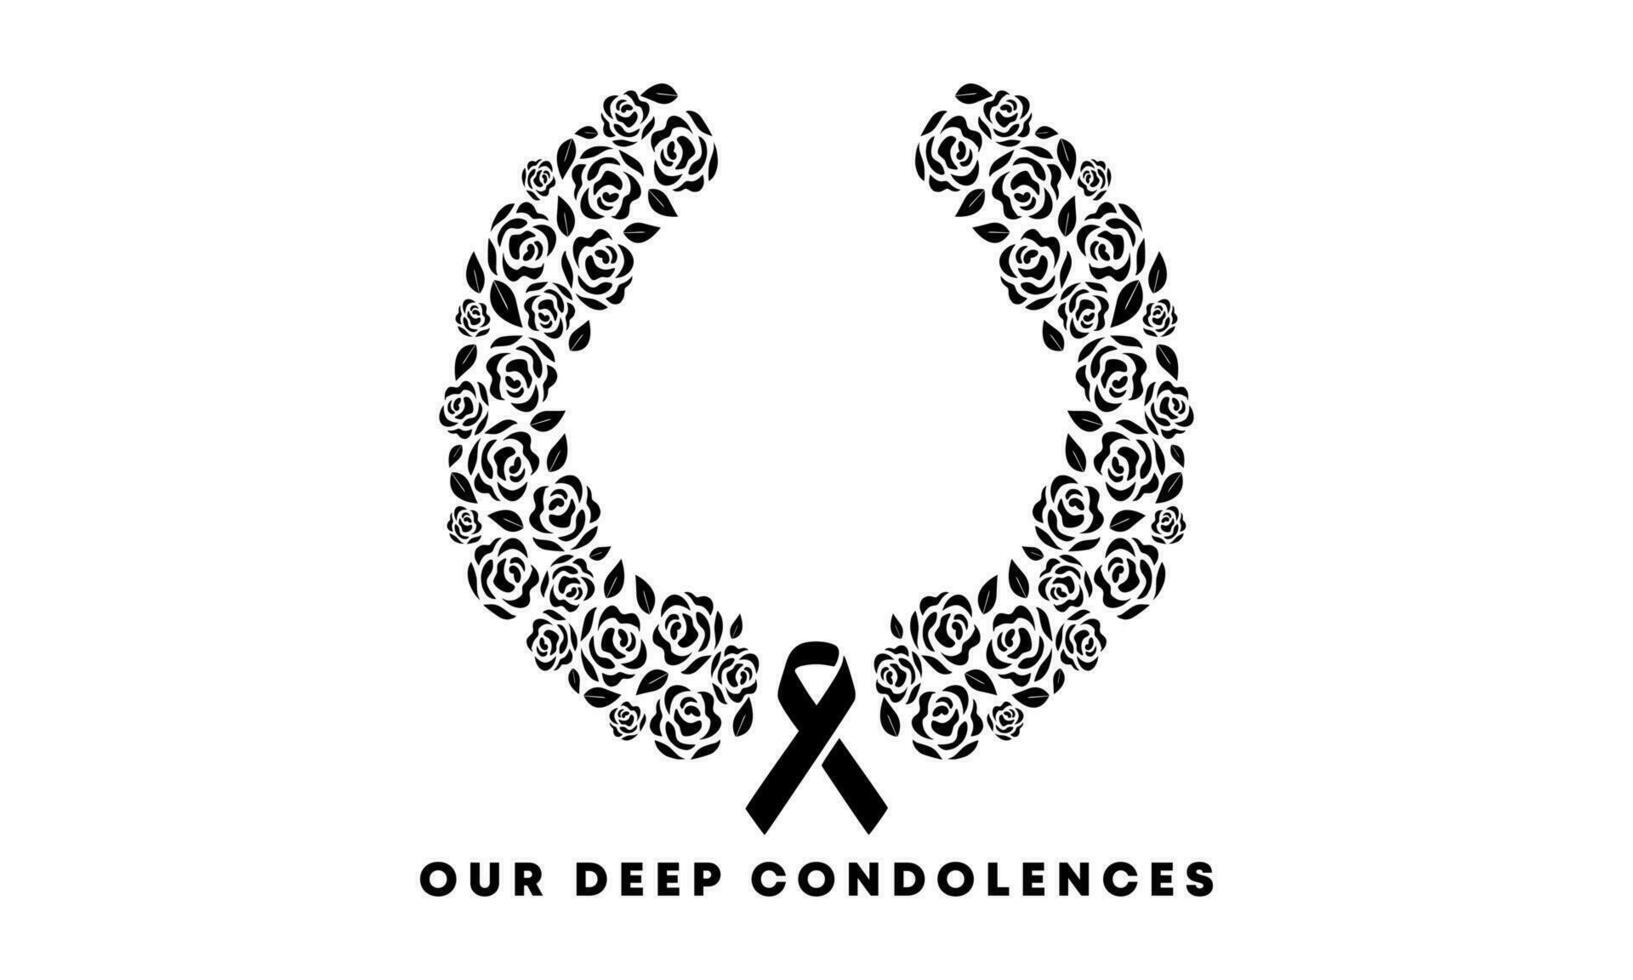 Black Respect ribbon and black rose round on white background Banner. Deep Condolences Funeral Vector Illustration.